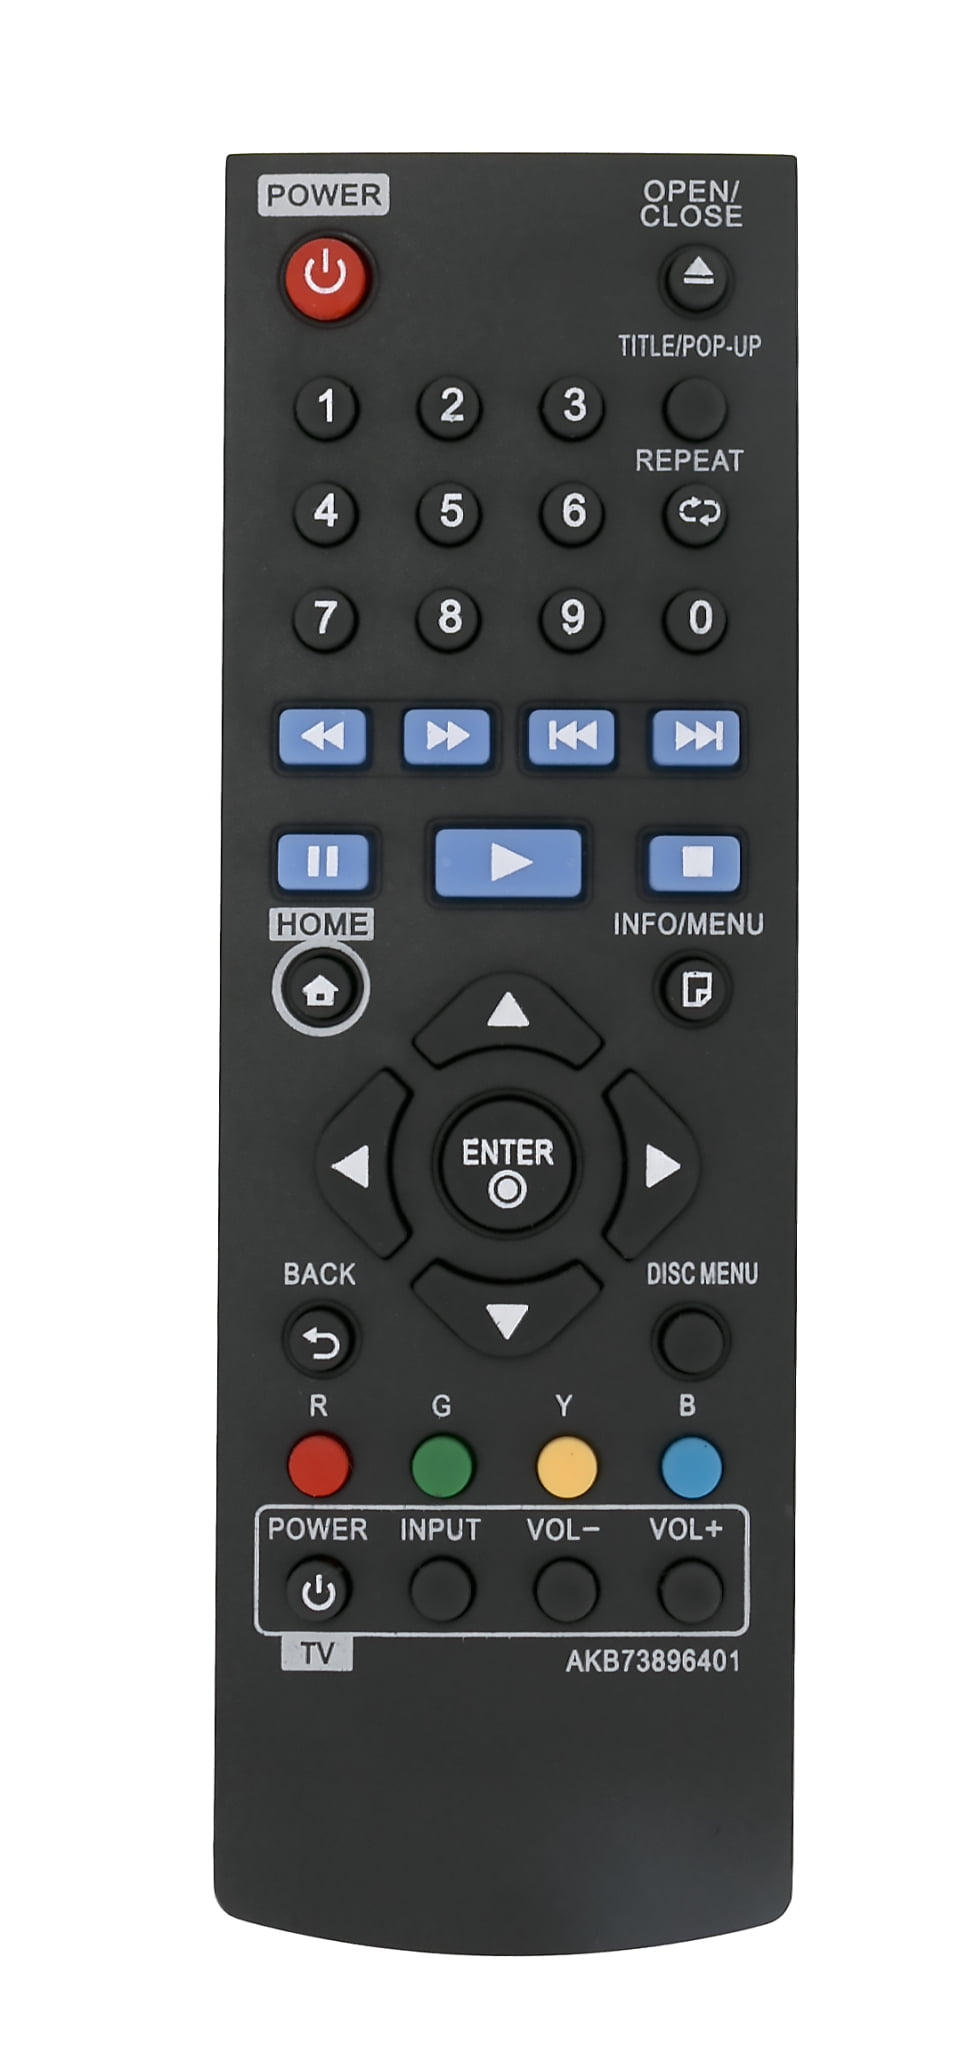 New AKB73896401 Remote control fit for LG BLU RAY DISC DVD PLAYER BP135 BP145 BP155 BP175 BP255 BP300 BP335W BP340 BP350 BPM25 BPM35 UP870 UP875 BP550